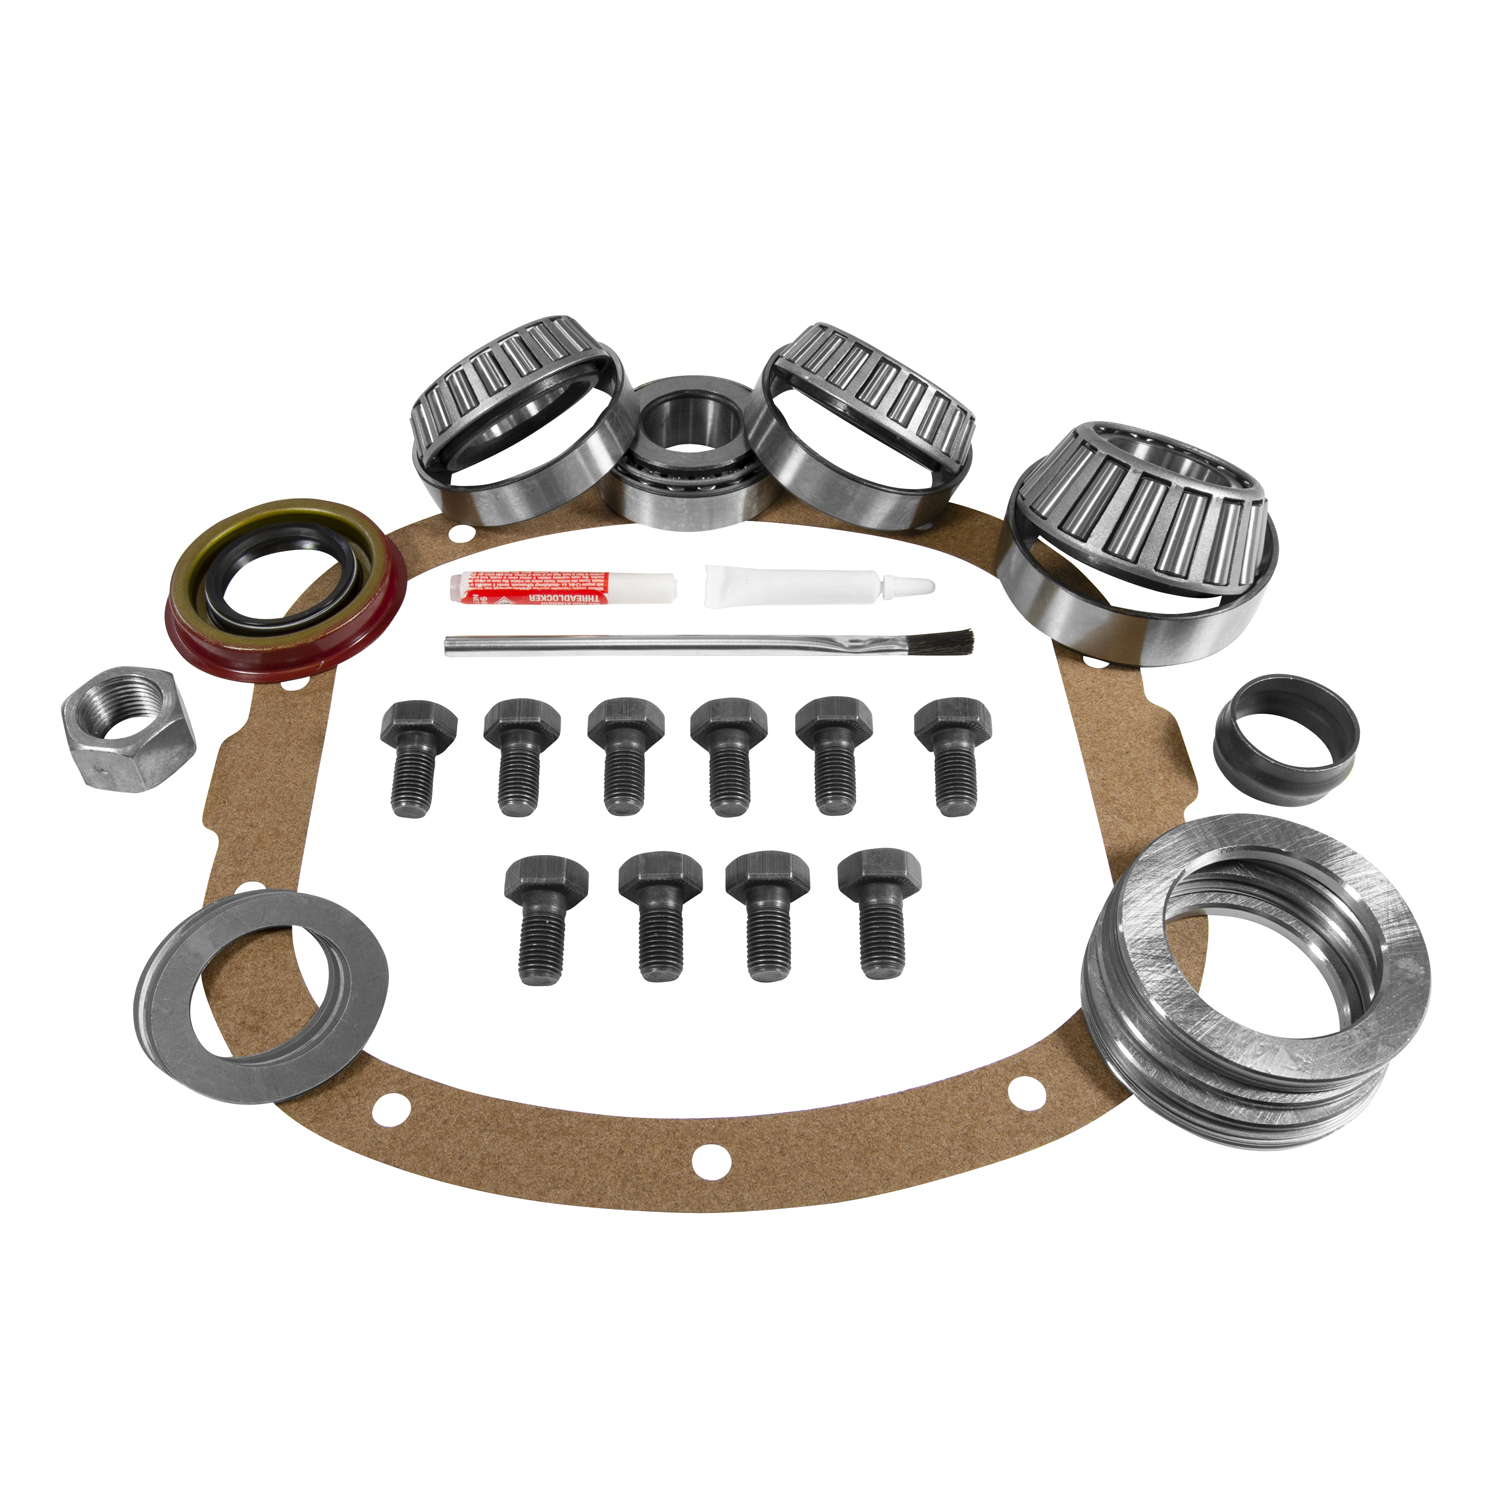 USA Standard ZK GM7.5-A Master Overhaul Kit, For The '81 & Older GM 7.5 in. Differential